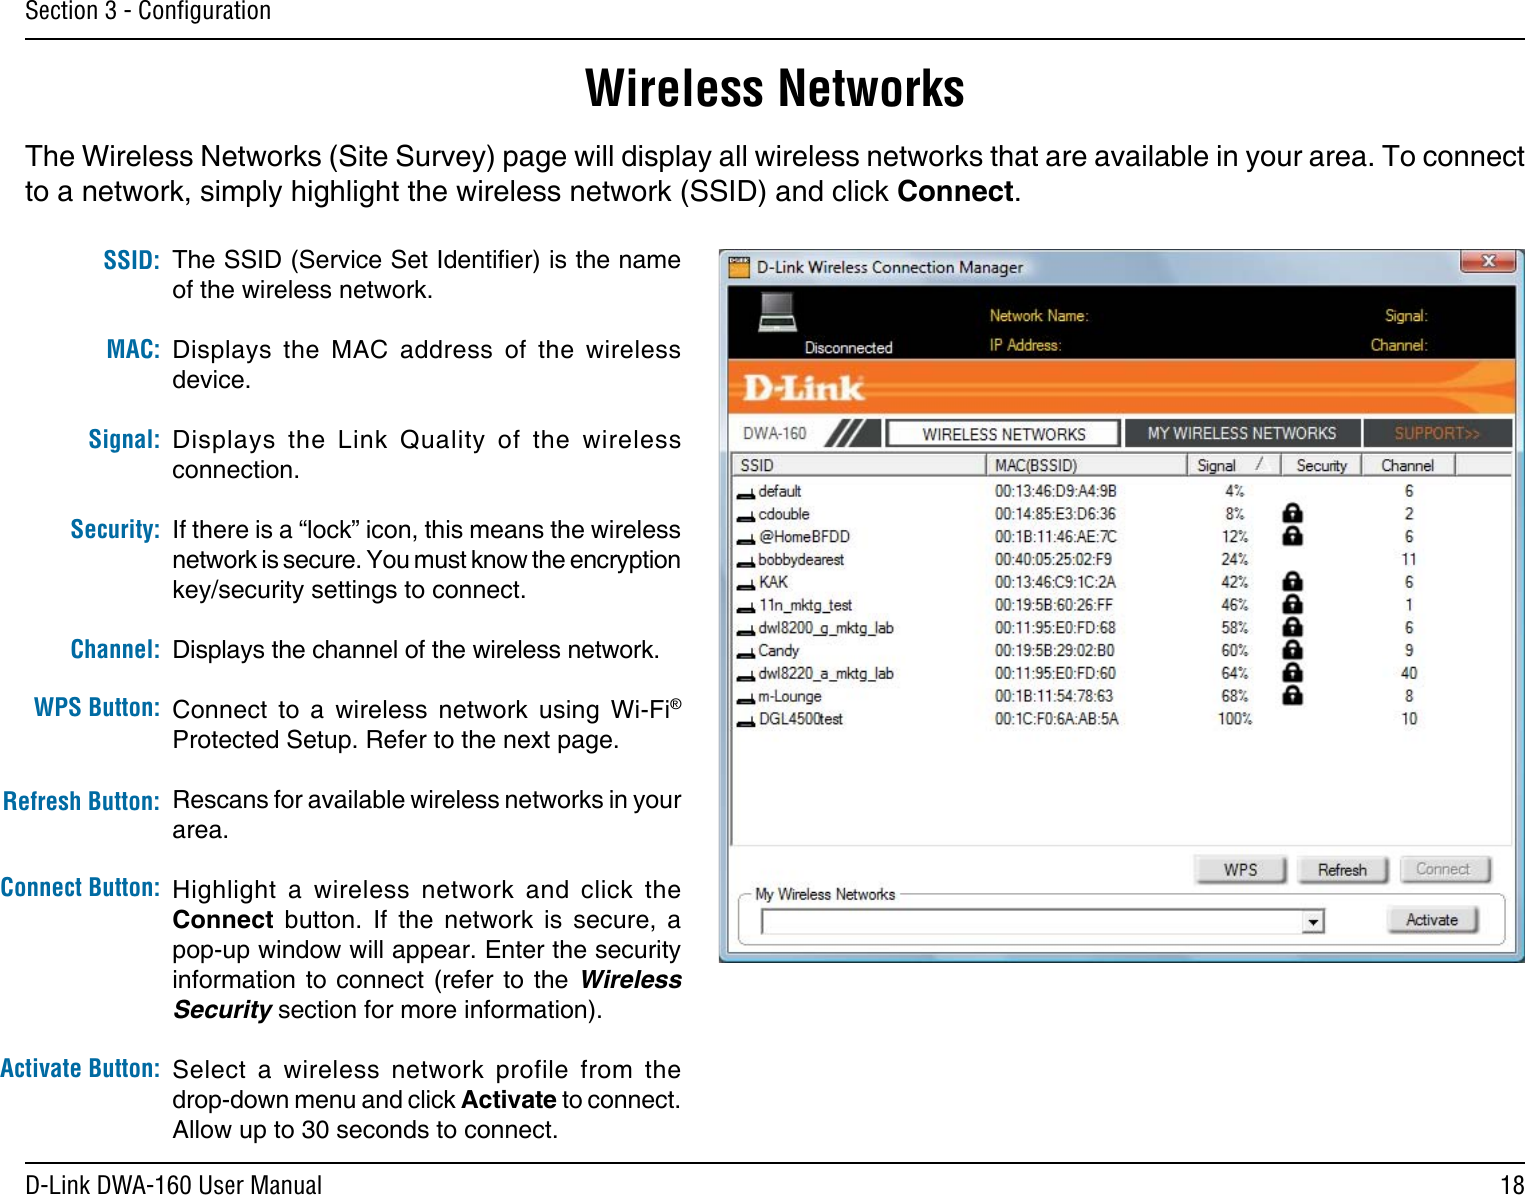 18D-Link DWA-160 User ManualSection 3 - ConﬁgurationWireless NetworksThe SSID (Service Set Identier) is the name of the wireless network.Displays  the  MAC  address  of  the  wireless device.Displays  the  Link  Quality  of  the  wireless connection. If there is a “lock” icon, this means the wireless network is secure. You must know the encryption key/security settings to connect.Displays the channel of the wireless network.Connect  to  a  wireless  network  using  Wi-Fi® Protected Setup. Refer to the next page.Rescans for available wireless networks in your area.Highlight  a  wireless  network  and  click  the Connect  button.  If  the  network  is  secure,  a pop-up window will appear. Enter the security information to  connect  (refer to the Wireless Security section for more information).Select  a  wireless  network  profile  from  the  drop-down menu and click Activate to connect. Allow up to 30 seconds to connect.MAC:SSID:Channel:Signal:Security:Refresh Button:Connect Button:Activate Button:The Wireless Networks (Site Survey) page will display all wireless networks that are available in your area. To connect to a network, simply highlight the wireless network (SSID) and click Connect.WPS Button: